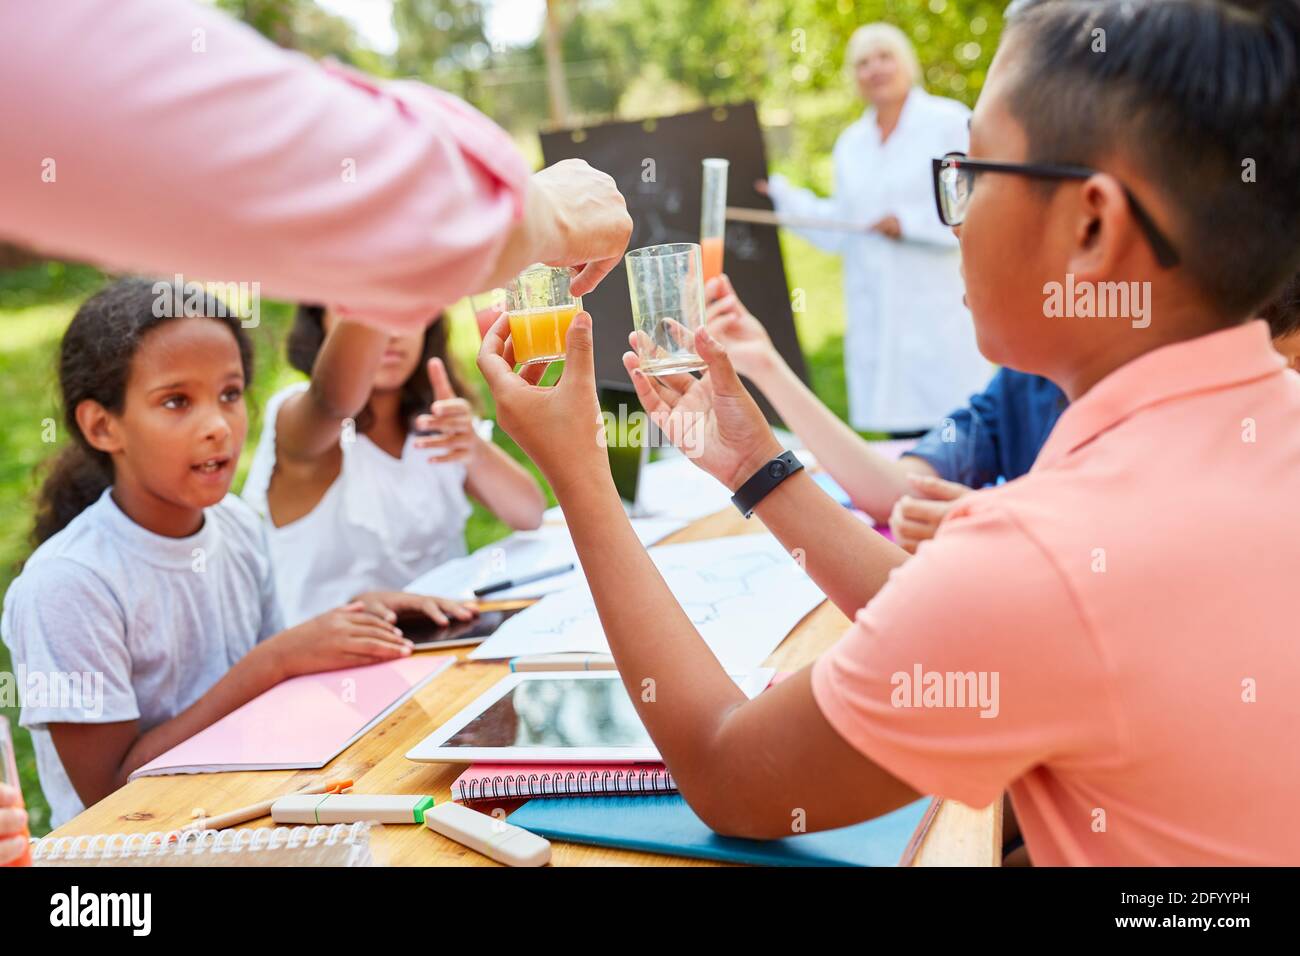 During tutoring, children do an experiment in the chemistry vacation course Stock Photo